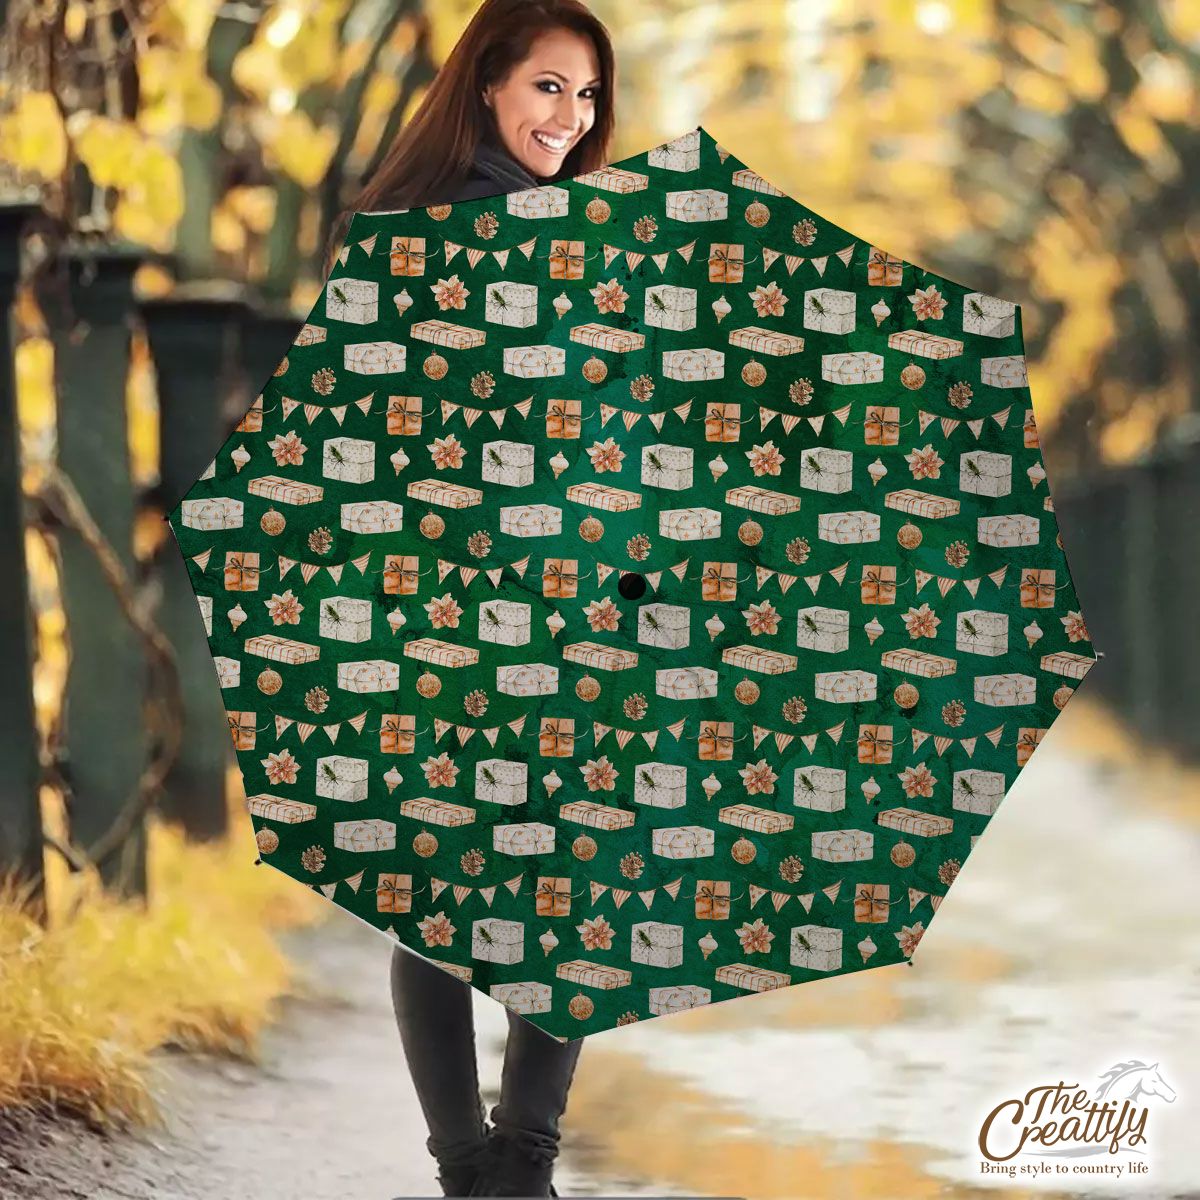 Pine Cone, Christmas Gifts With Flags Pattern Umbrella